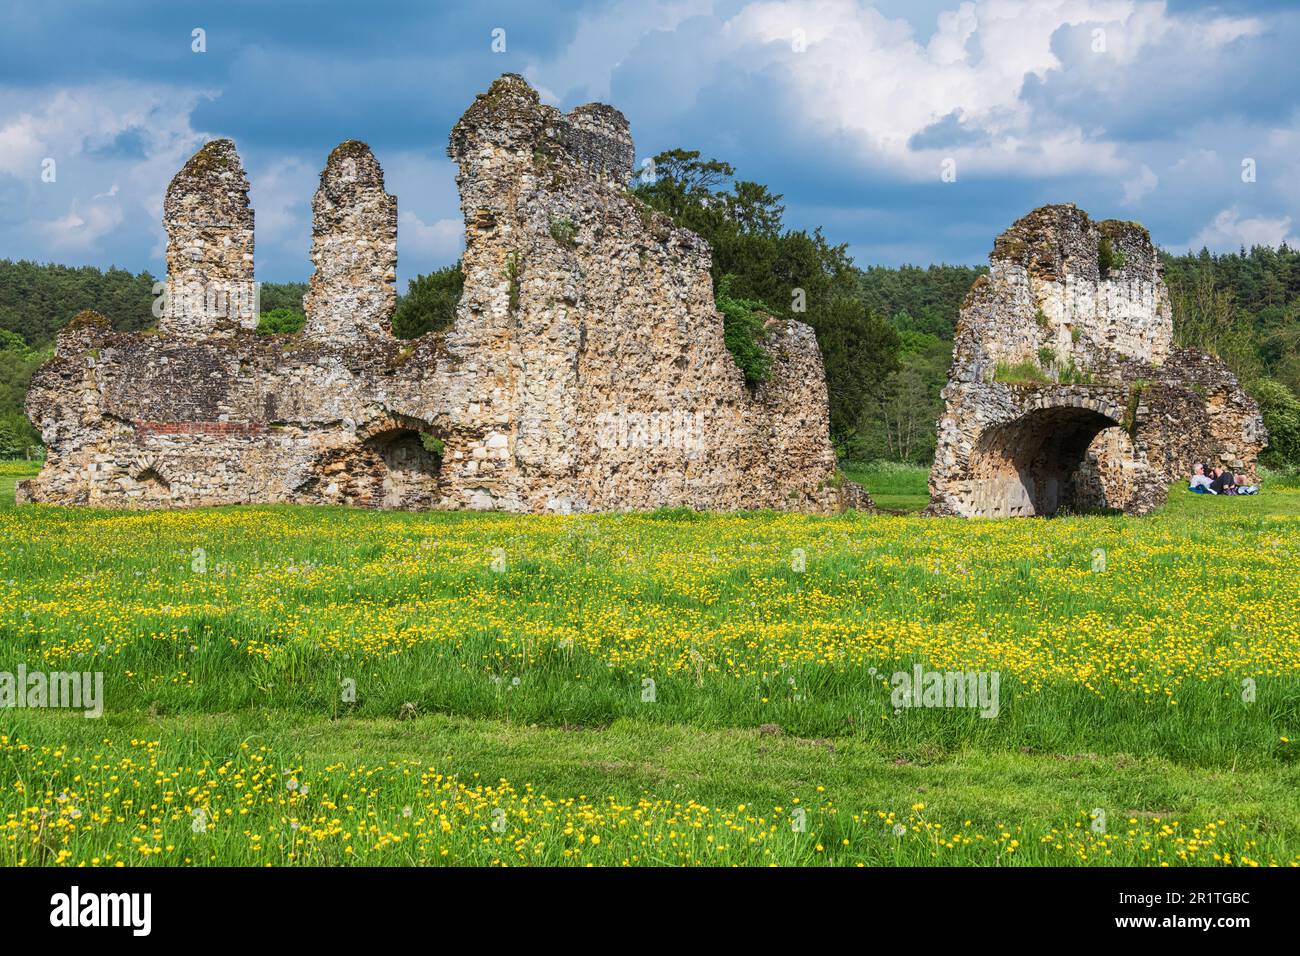 The ruined undercroft and monks dormitory, Waverley Abbey near Farnham, Surrey. The Abbey was the first Cistercian Monastery built n England in 1128. Stock Photo